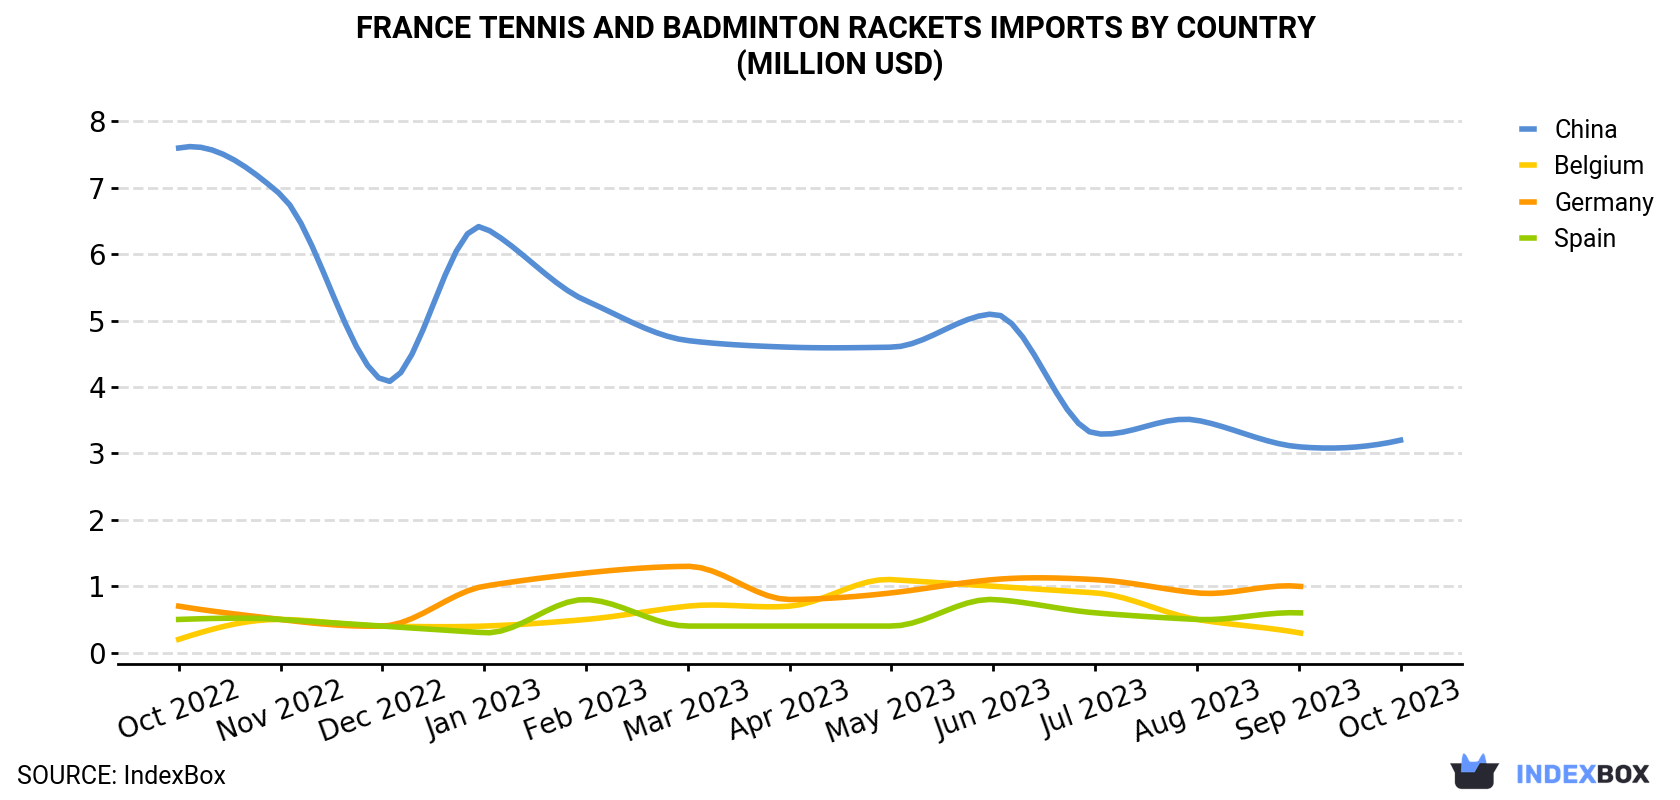 France Tennis And Badminton Rackets Imports By Country (Million USD)